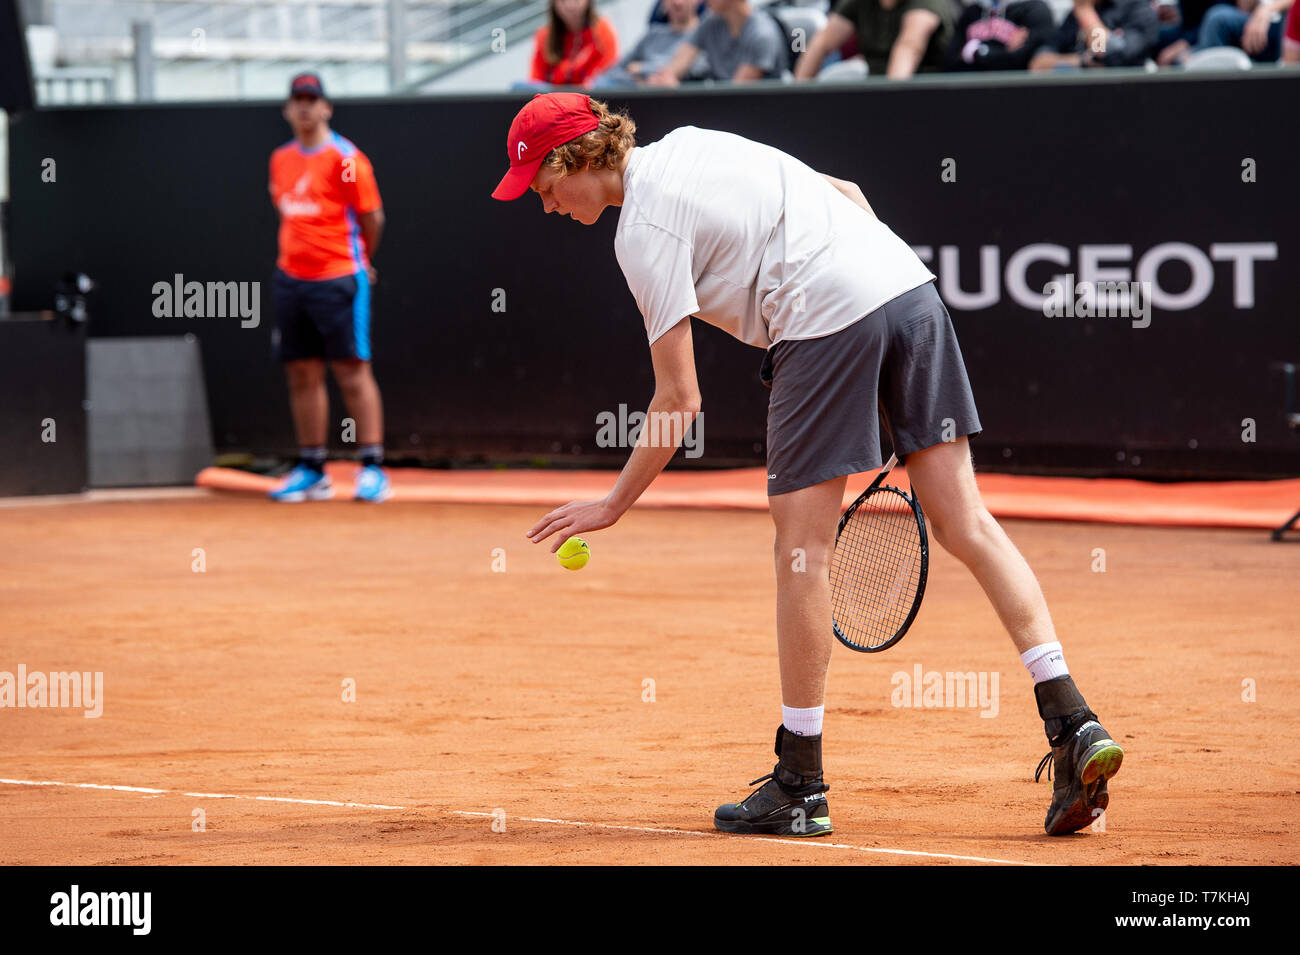 Rome, Italy. 08th May, 2019. Jannik Sinner of Italy in action during his  pre-qualification match against Lorenzo Musetti of Italy during the ATP  Masters 1000 Rome - 2019 Italian Open at the